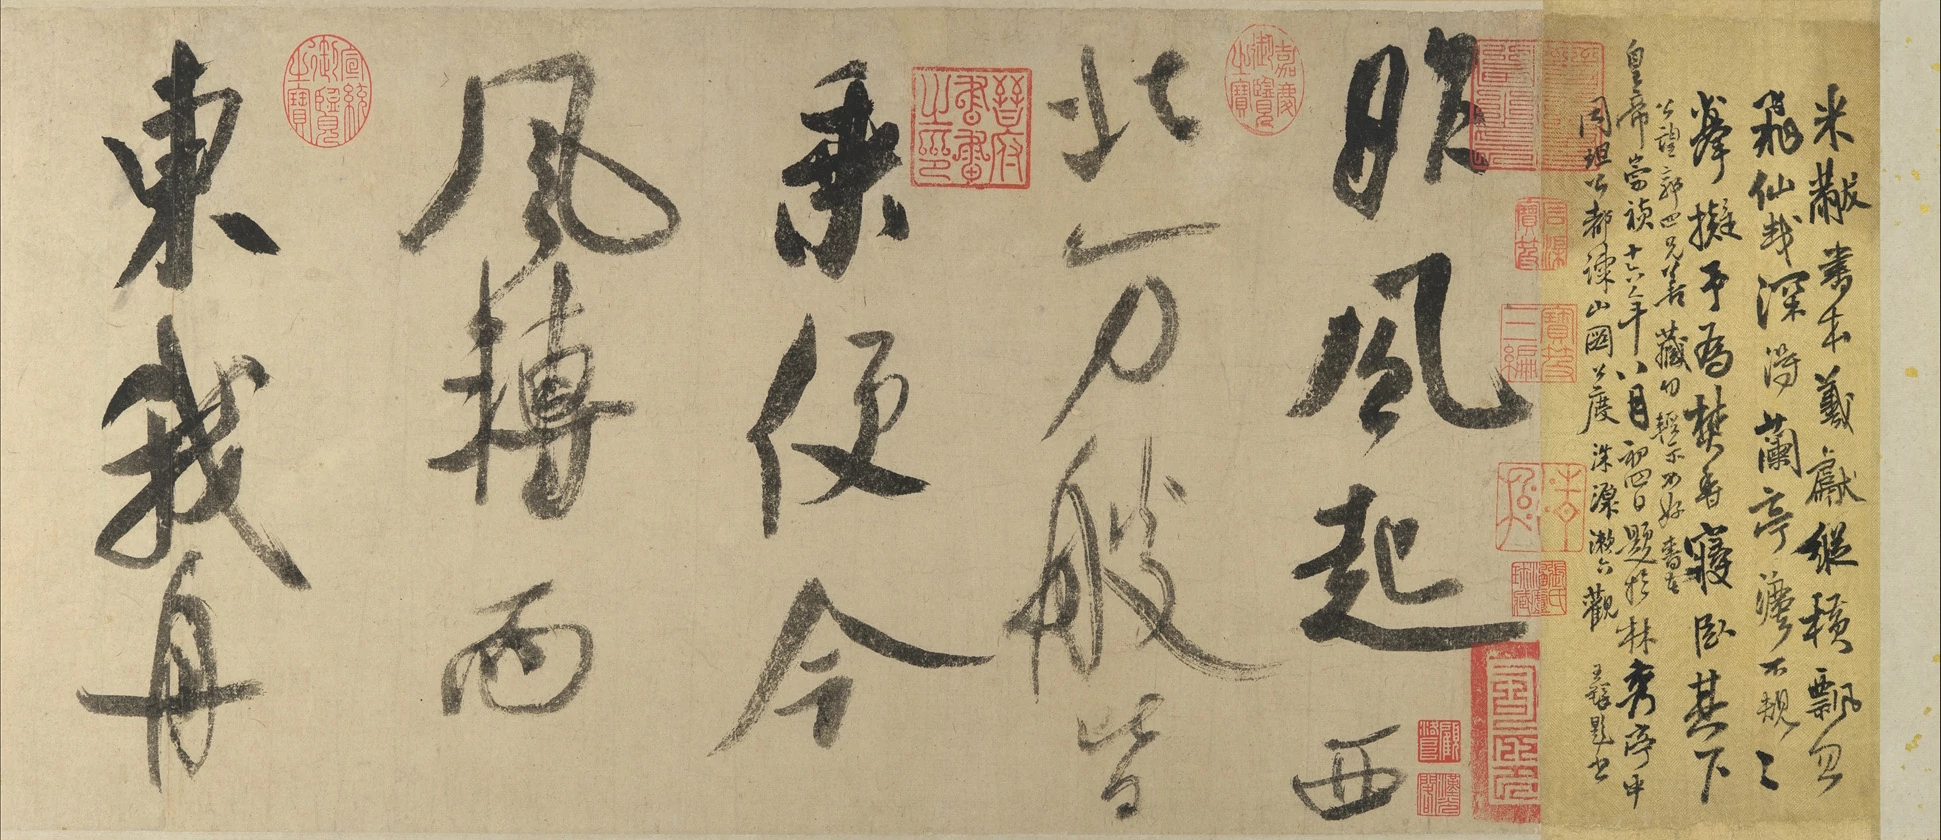 Poem Written in a Boat on the Wu River, Song Dynasty